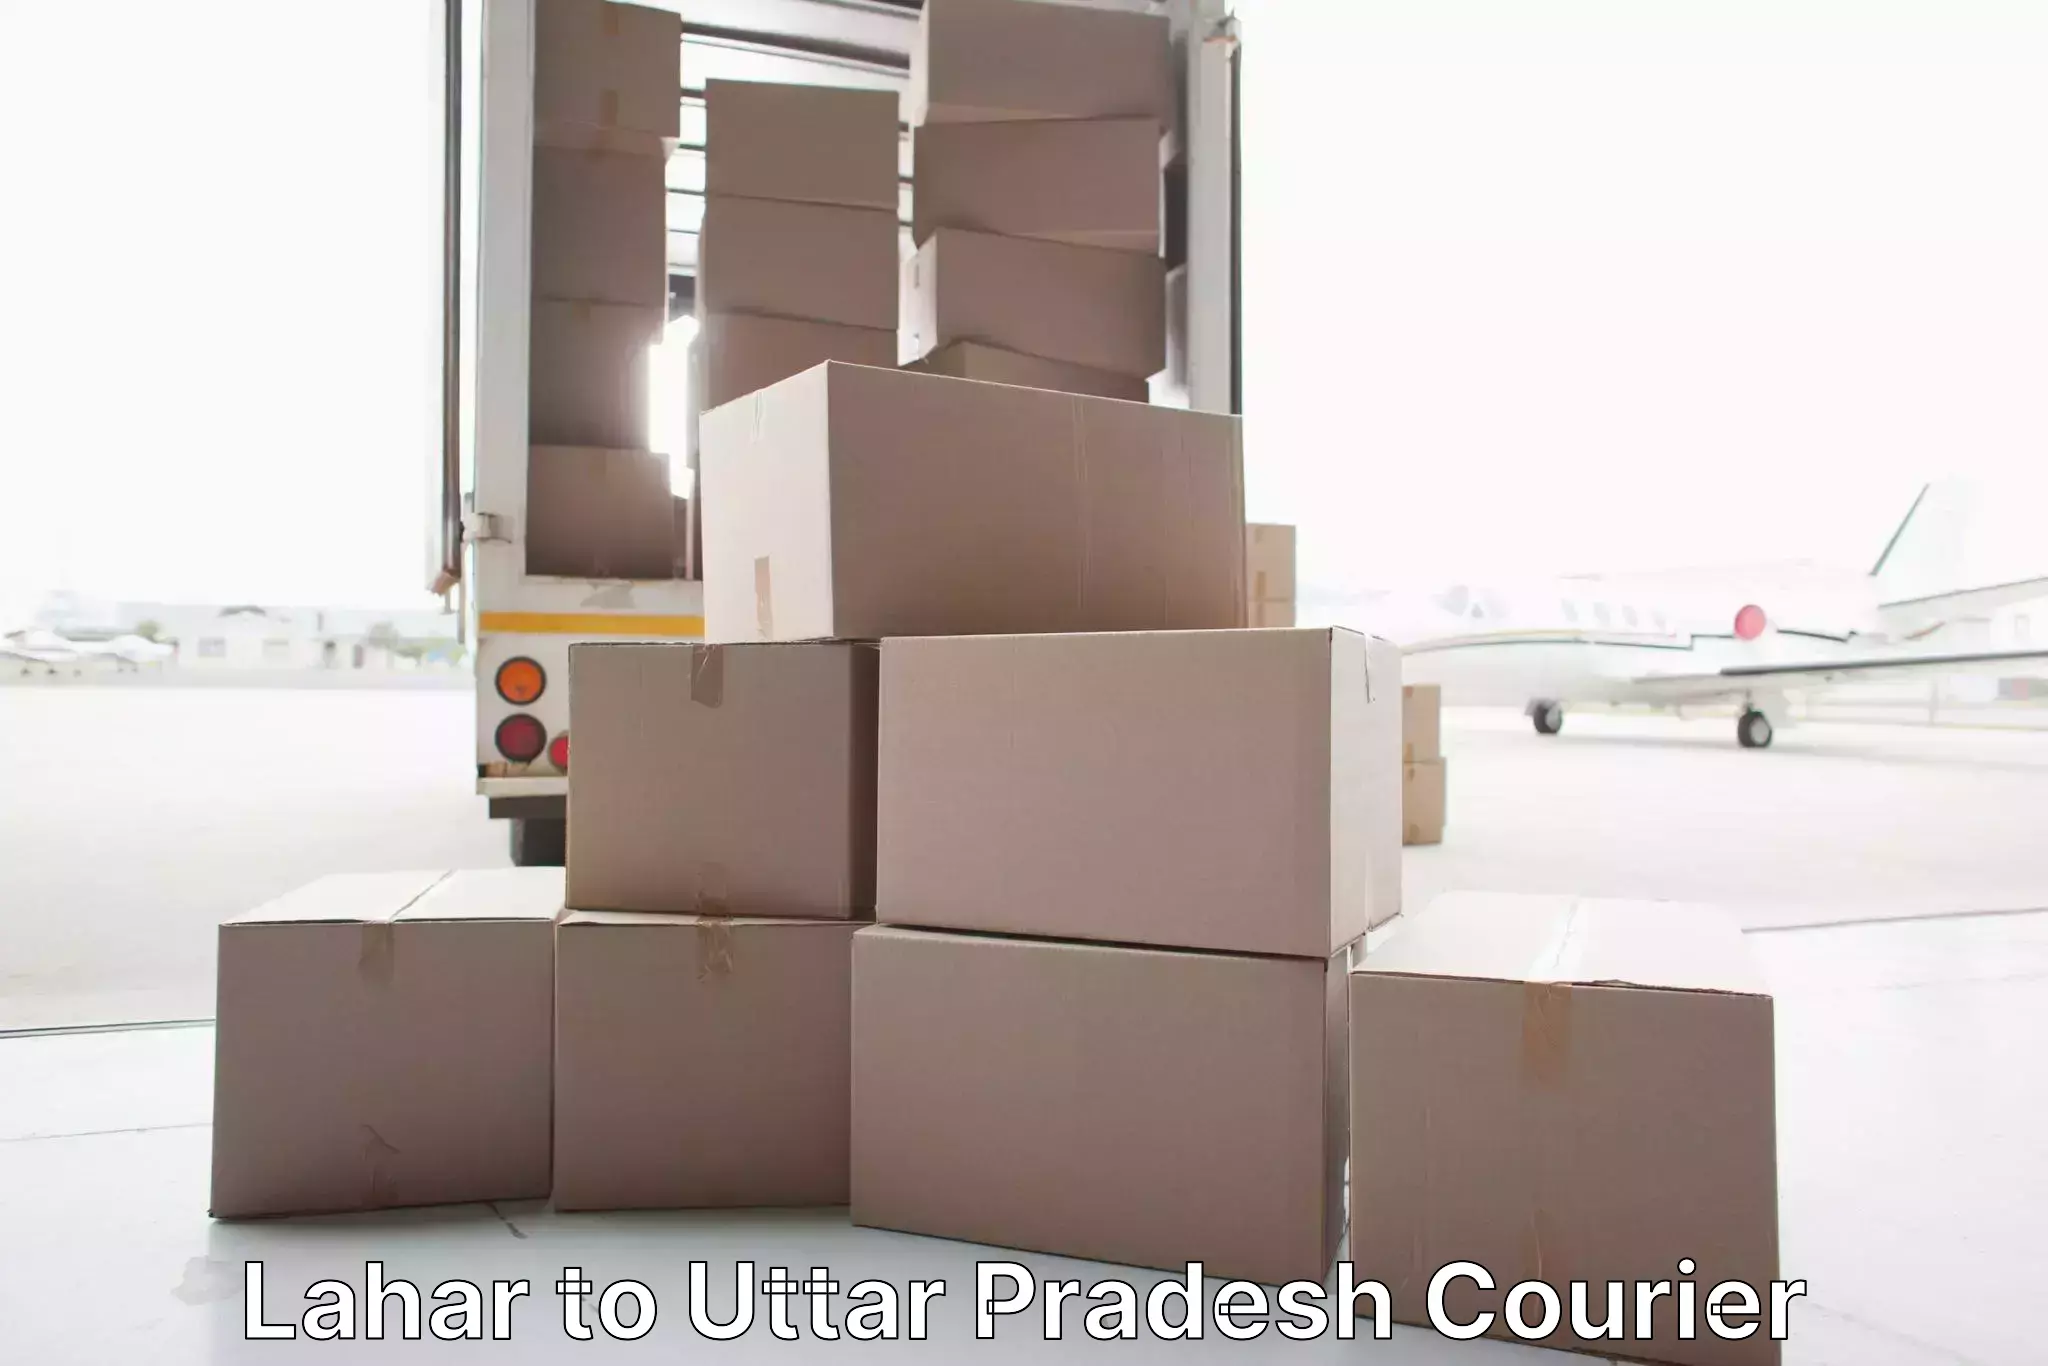 Flexible moving solutions Lahar to Ghazipur